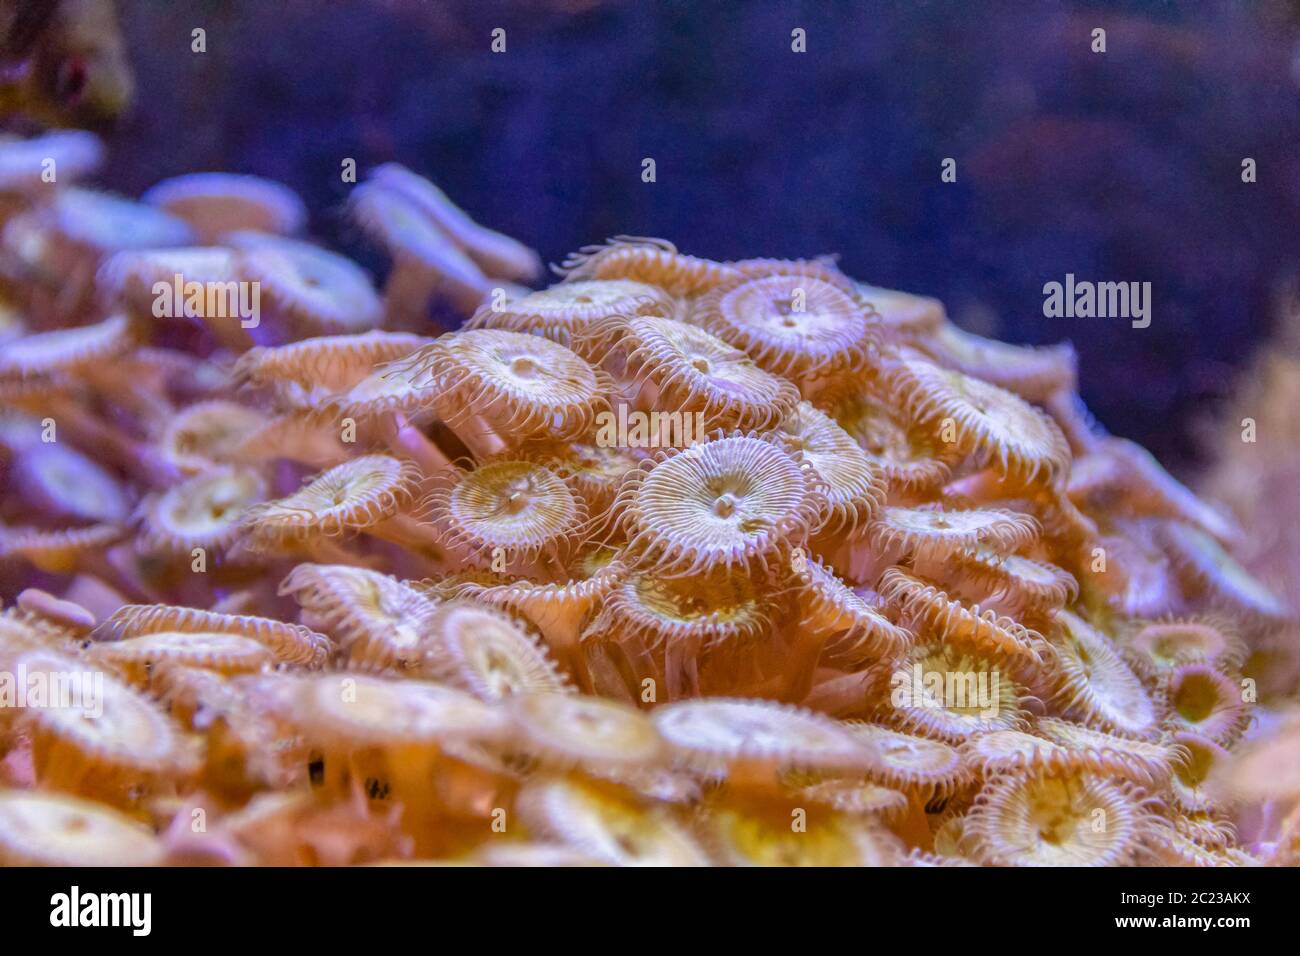 Sea anemones in natural underwater ambiance Stock Photo